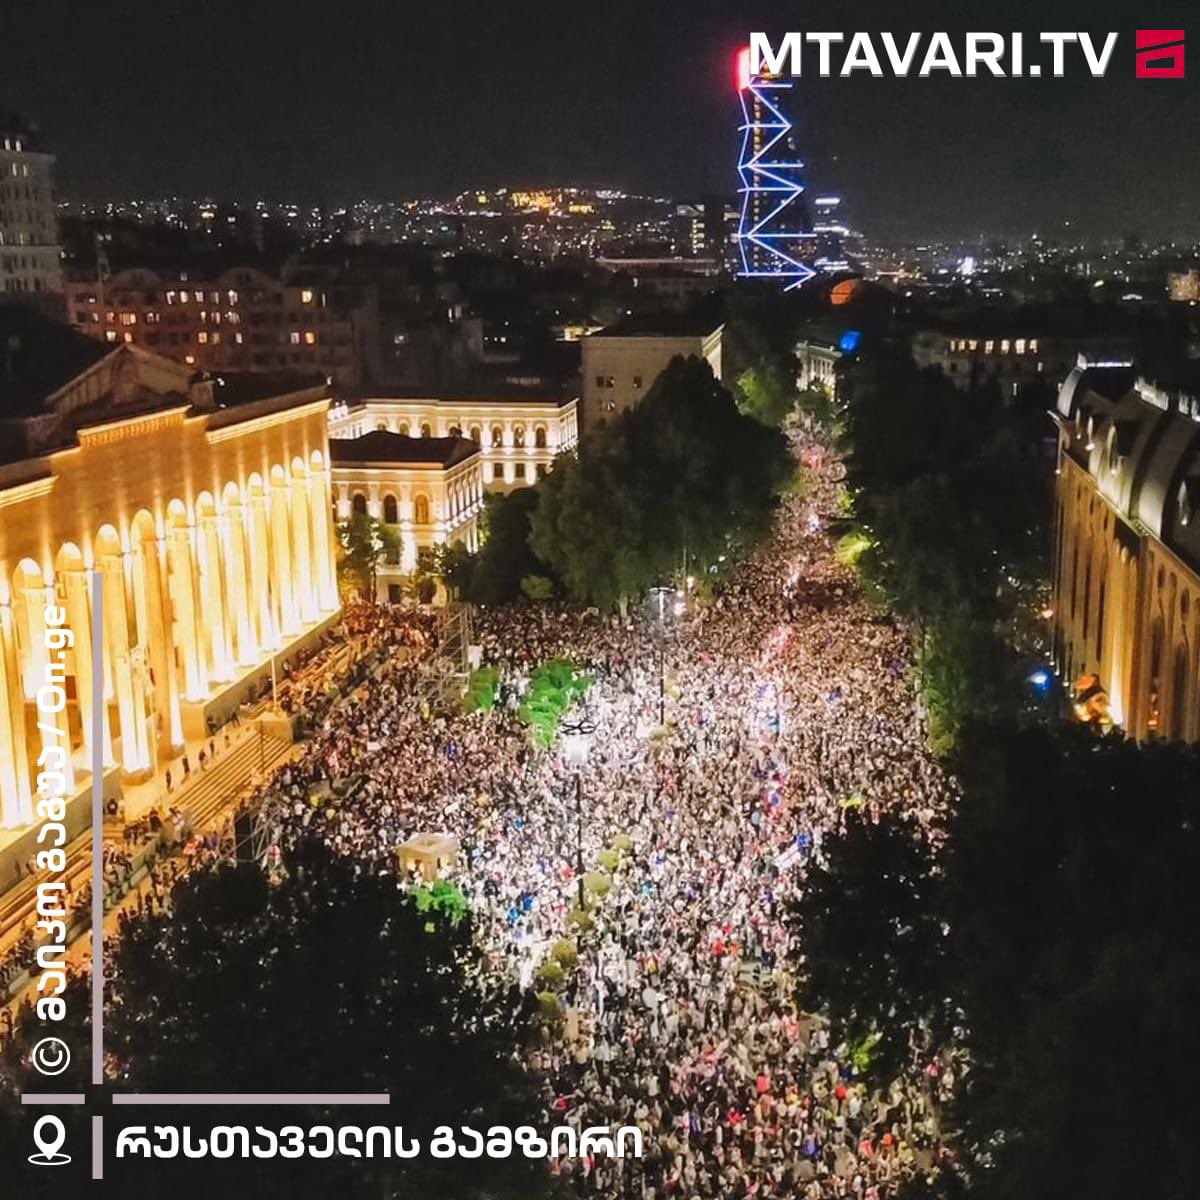 Georgians have been demonstrating remarkable courage in defending the country from becoming a Russian puppet state for over two weeks now. Anti-Russia protests persist. The West must adopt a bolder strategy to pressure the Georgian Dream including the use of targeted sanctions.